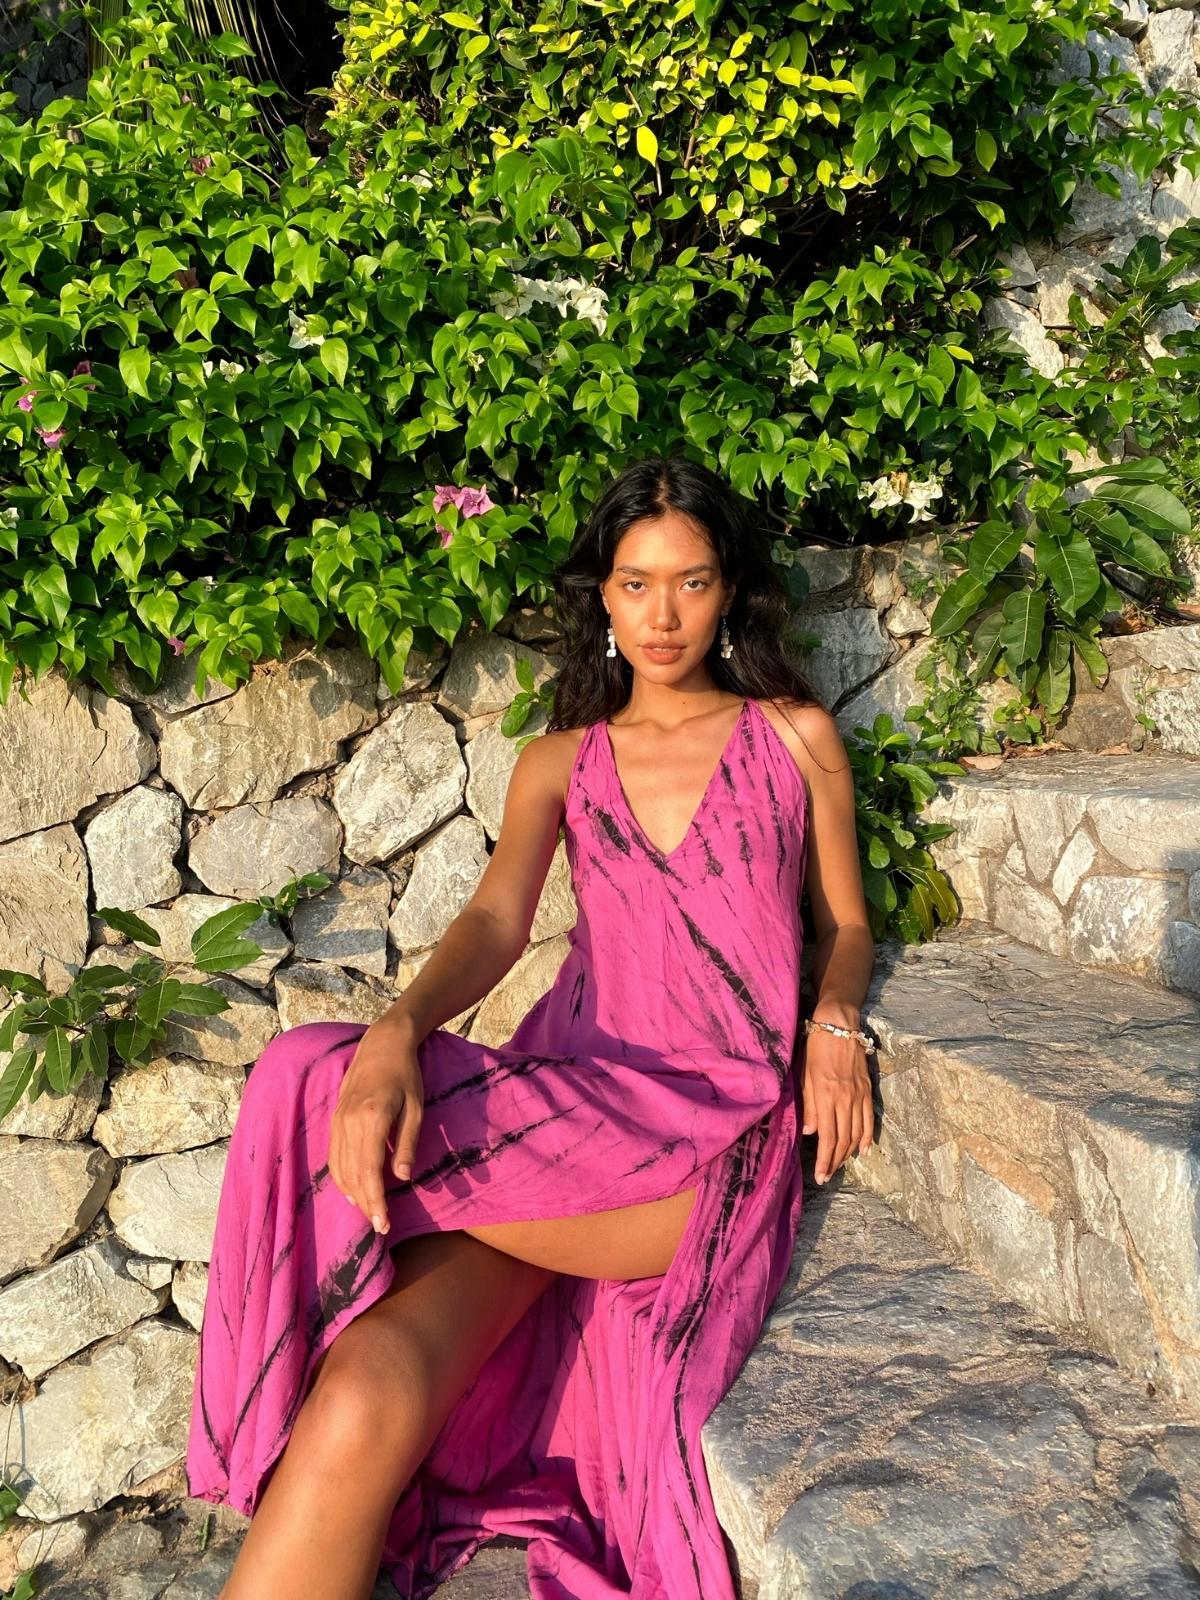 Shop our beautiful dresses, best sellers tie dye maxi dress, tie dye summer dress, honeymoon dress, long kaftan, goddess dress for any occasions with Coco de Chom. Our dresses, kimonos, and loungewear bring the beach to you, wherever you are.